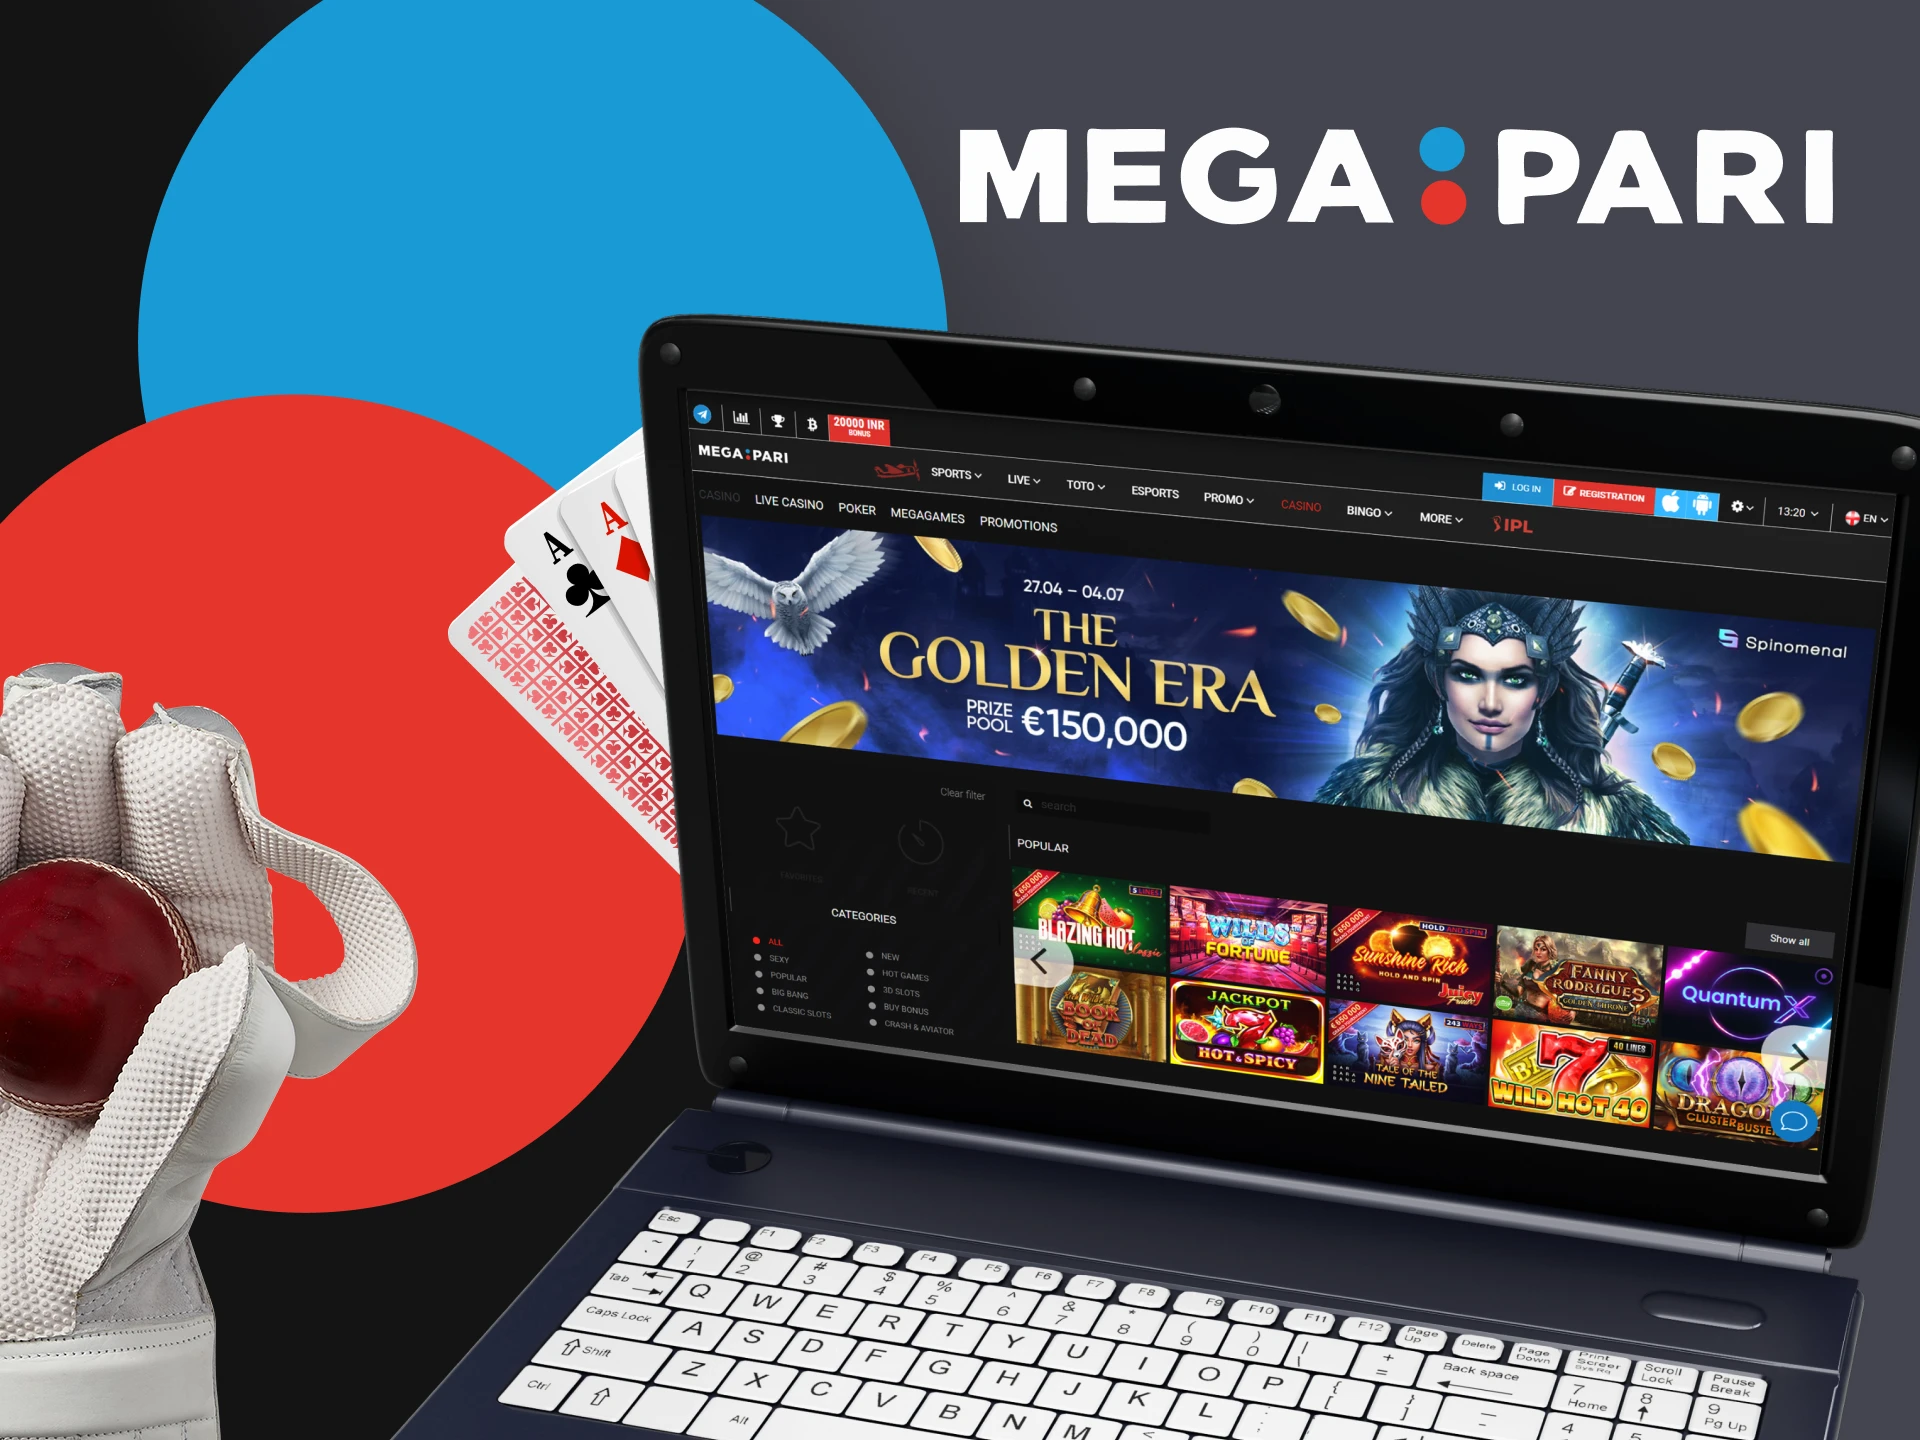 Place your bets and play with the Megapari PC app.